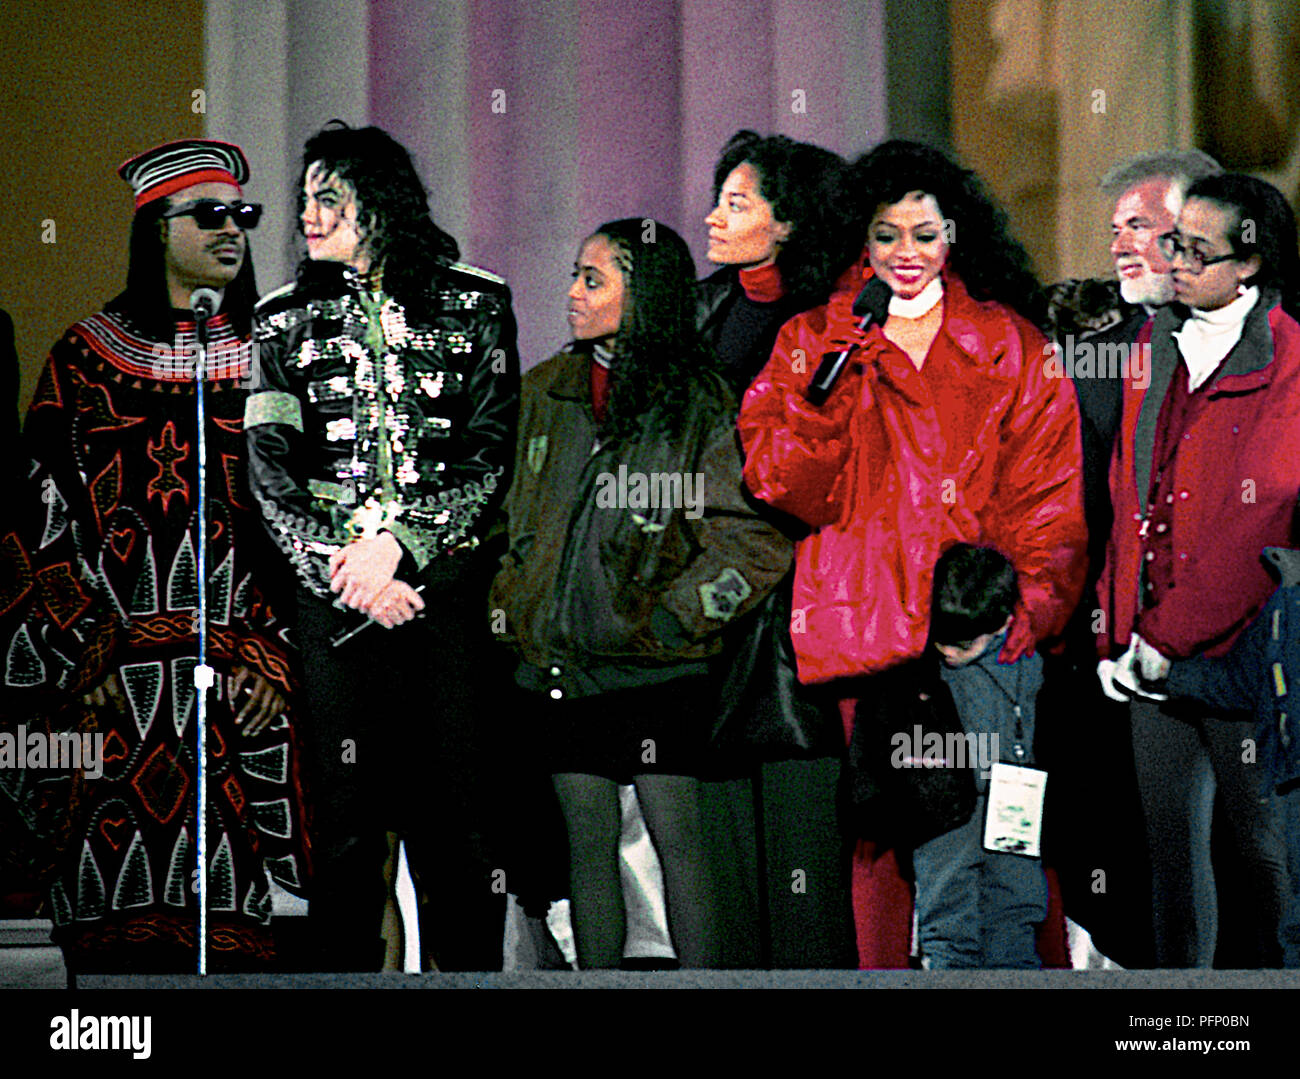 Washington, DC.USA, January 17, 1993  The chorus of 'We Are the World,' with Stevie Wonder, Michael Jackson, Kathleen Battle, Diana Ross, Kenny Rogers. America's Reunion on the Mall was a two-day multi-stage festival as part of the 1993 Presidential Inaugural Celebration, held from January 17Ð19. The two-hour outdoor concert that started the festival kicked off the Clinton/Gore Inaugural. Stock Photo